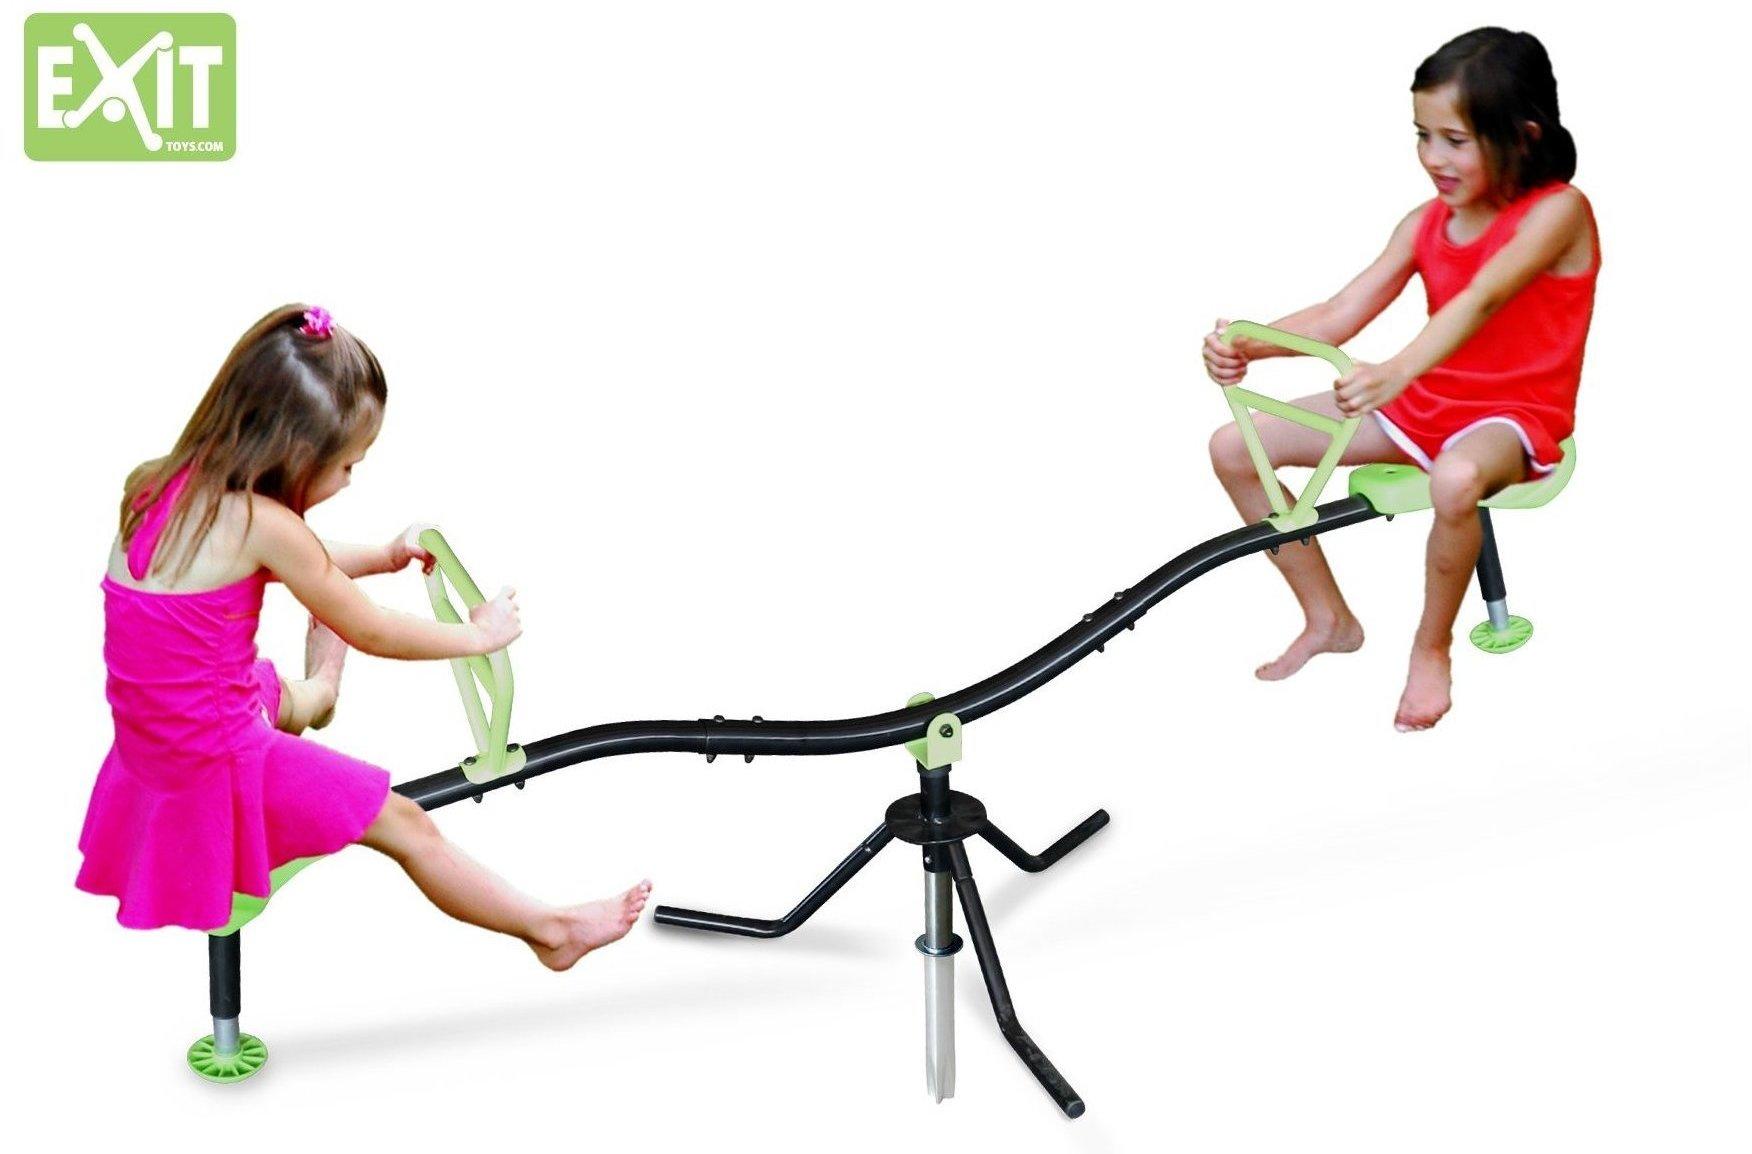 Exit Toys Karussell Wippe Test TOP Angebote ab 99,95 € (Februar 2023)